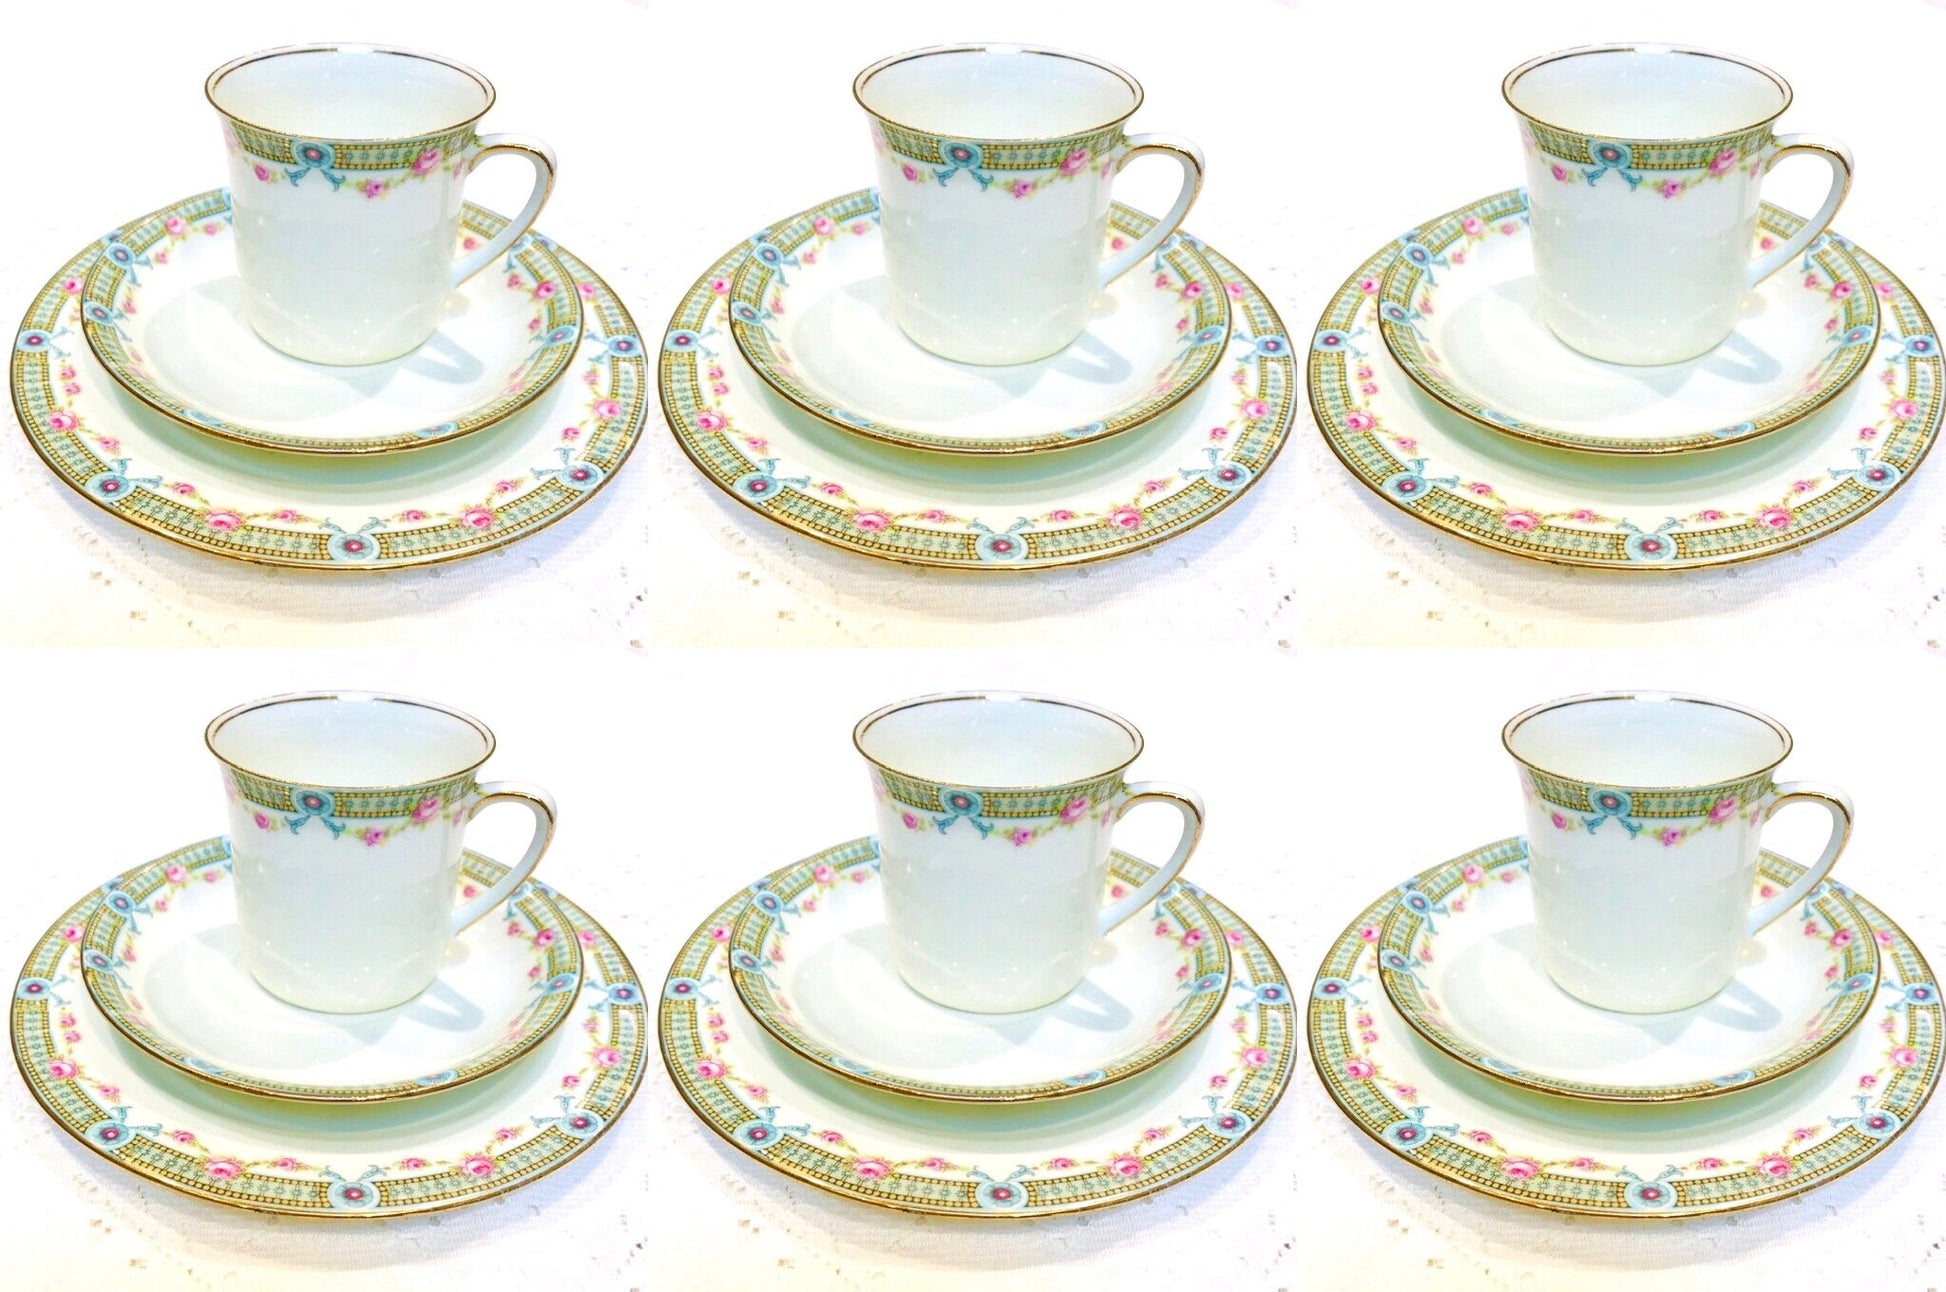 Charming Vintage Tea Set Swags & Bows Teacups and Saucers a beautiful vintage/antique fine bone china made in England by EHughes Company